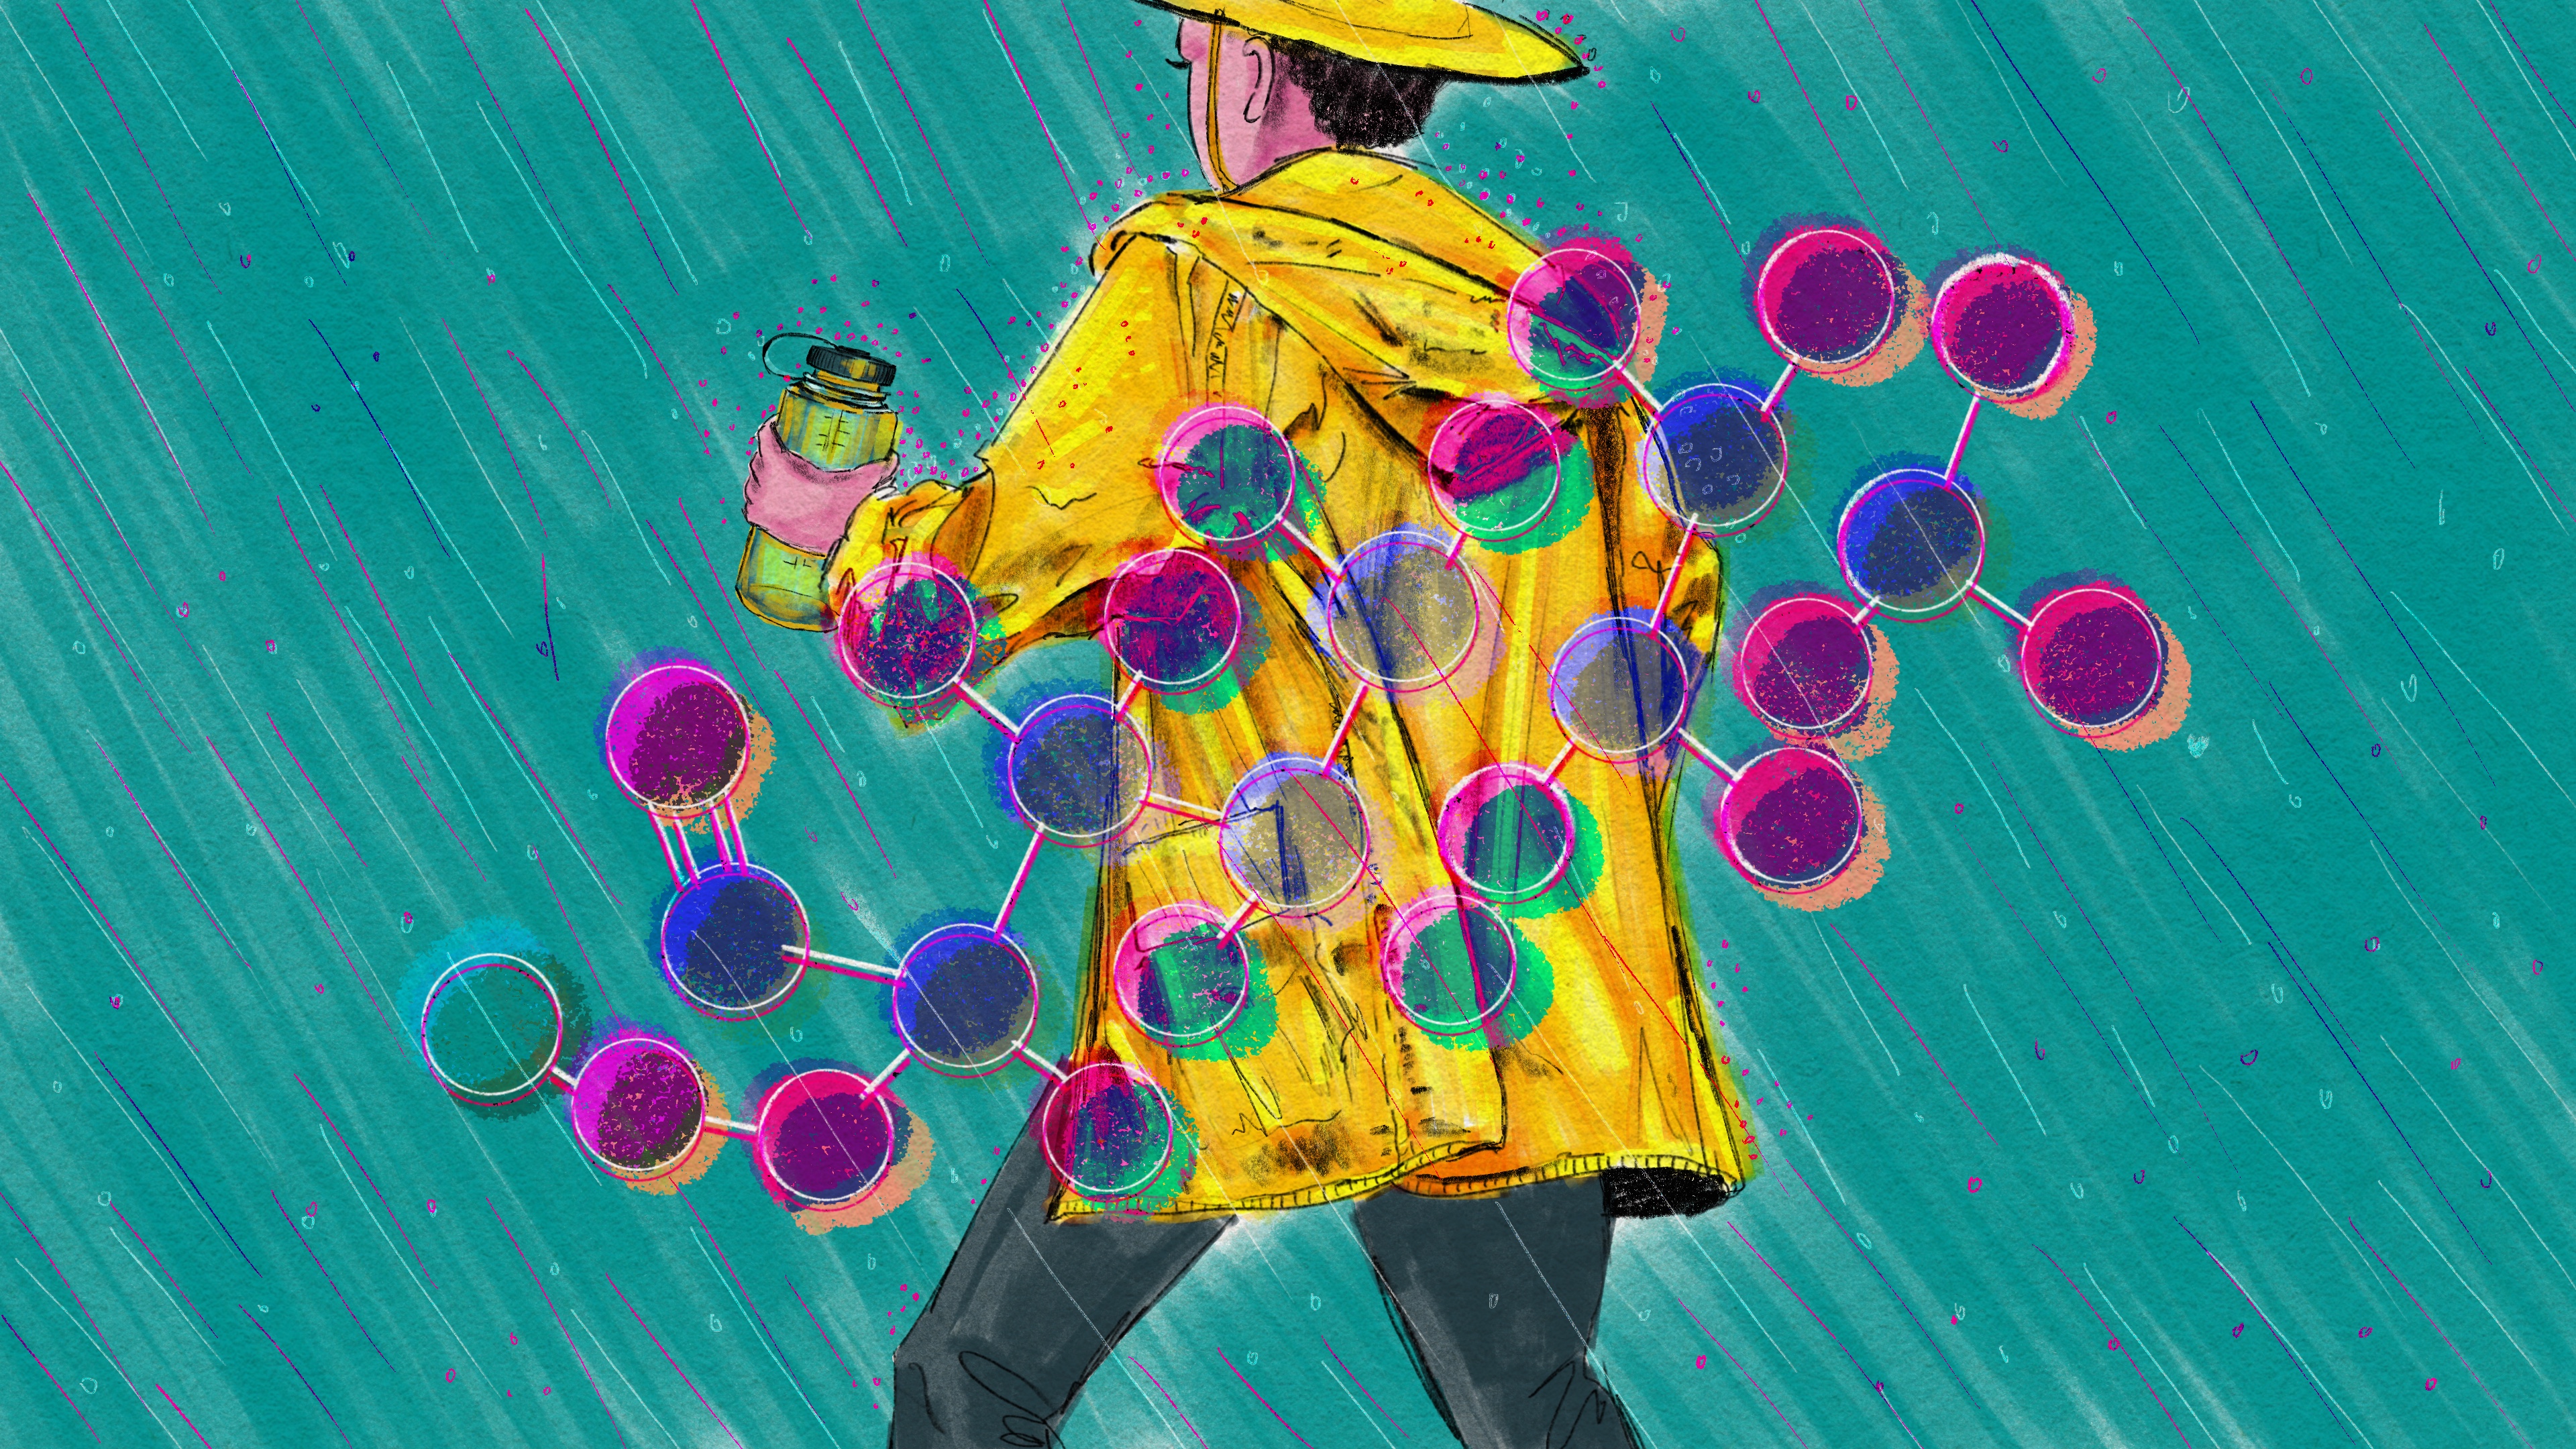 A digital illustration in pencil and copic marker shows the rear view of a person wearing a yellow raincoat and hat. A drawing of the chemical structure of perfluoroalkyl, or PFAS, is overlaid over the person in vivid colors.